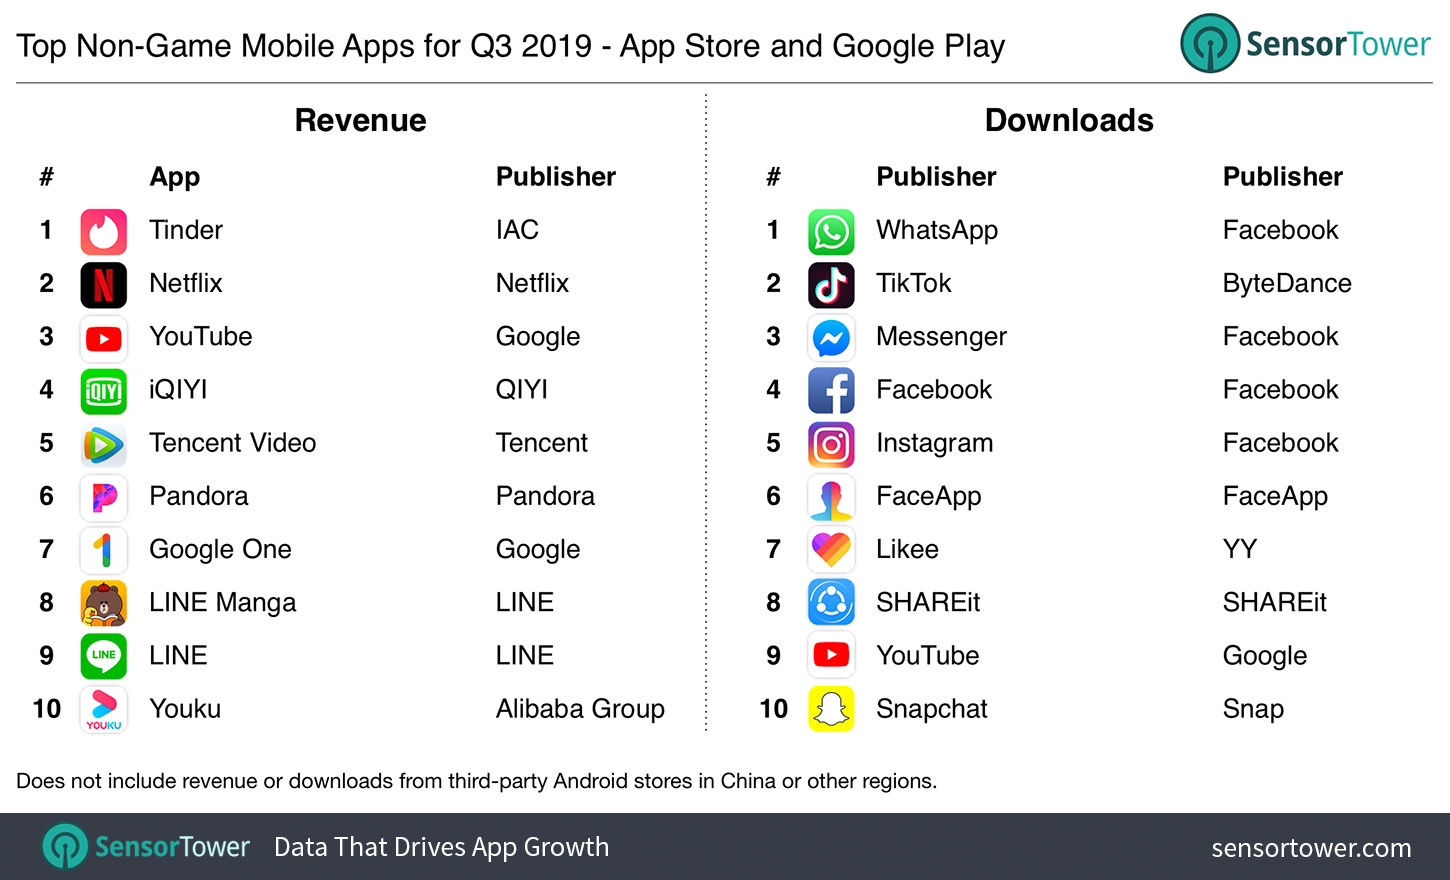 Q3 2019 Top Non-Game Mobile Apps by Revenue and Downloads